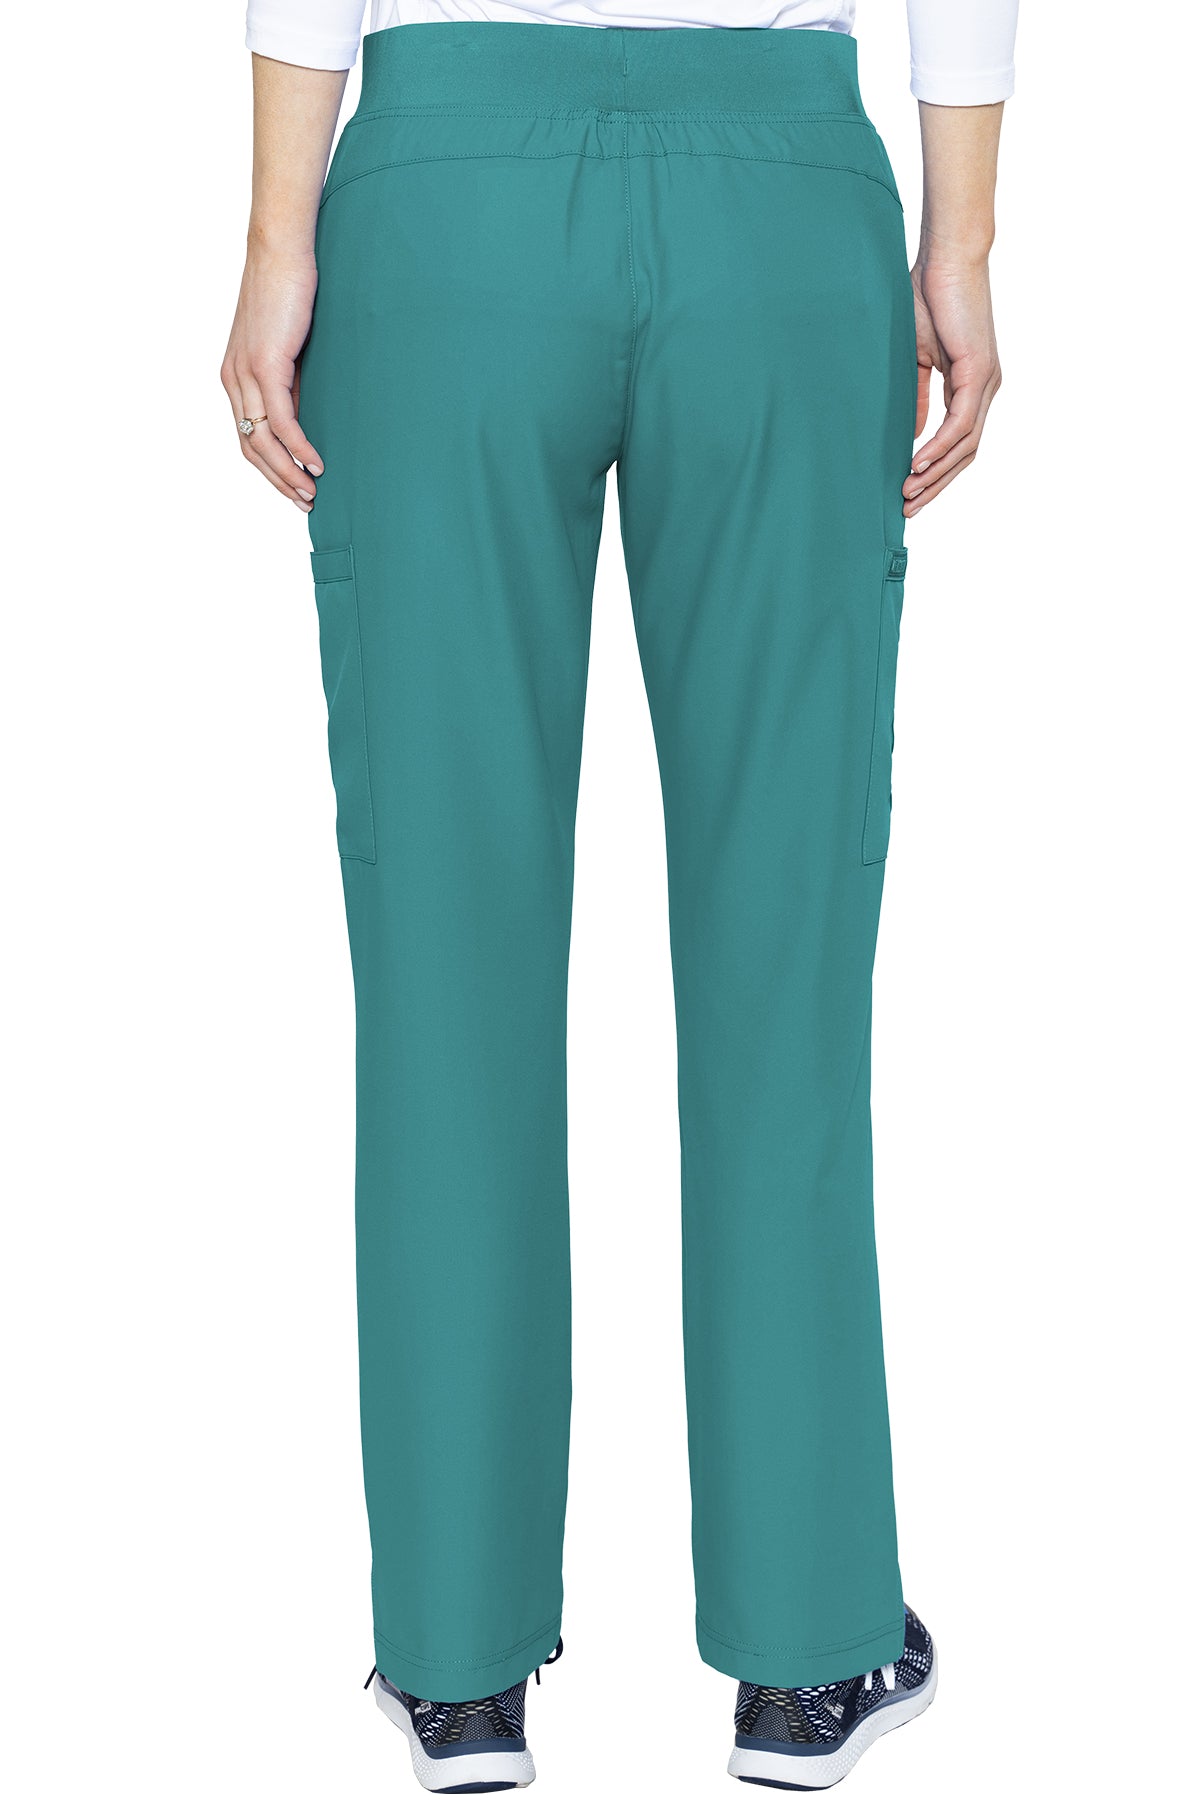 Med Couture 2702 Insight Women's Zipper Pocket Pant - TALL teal back 